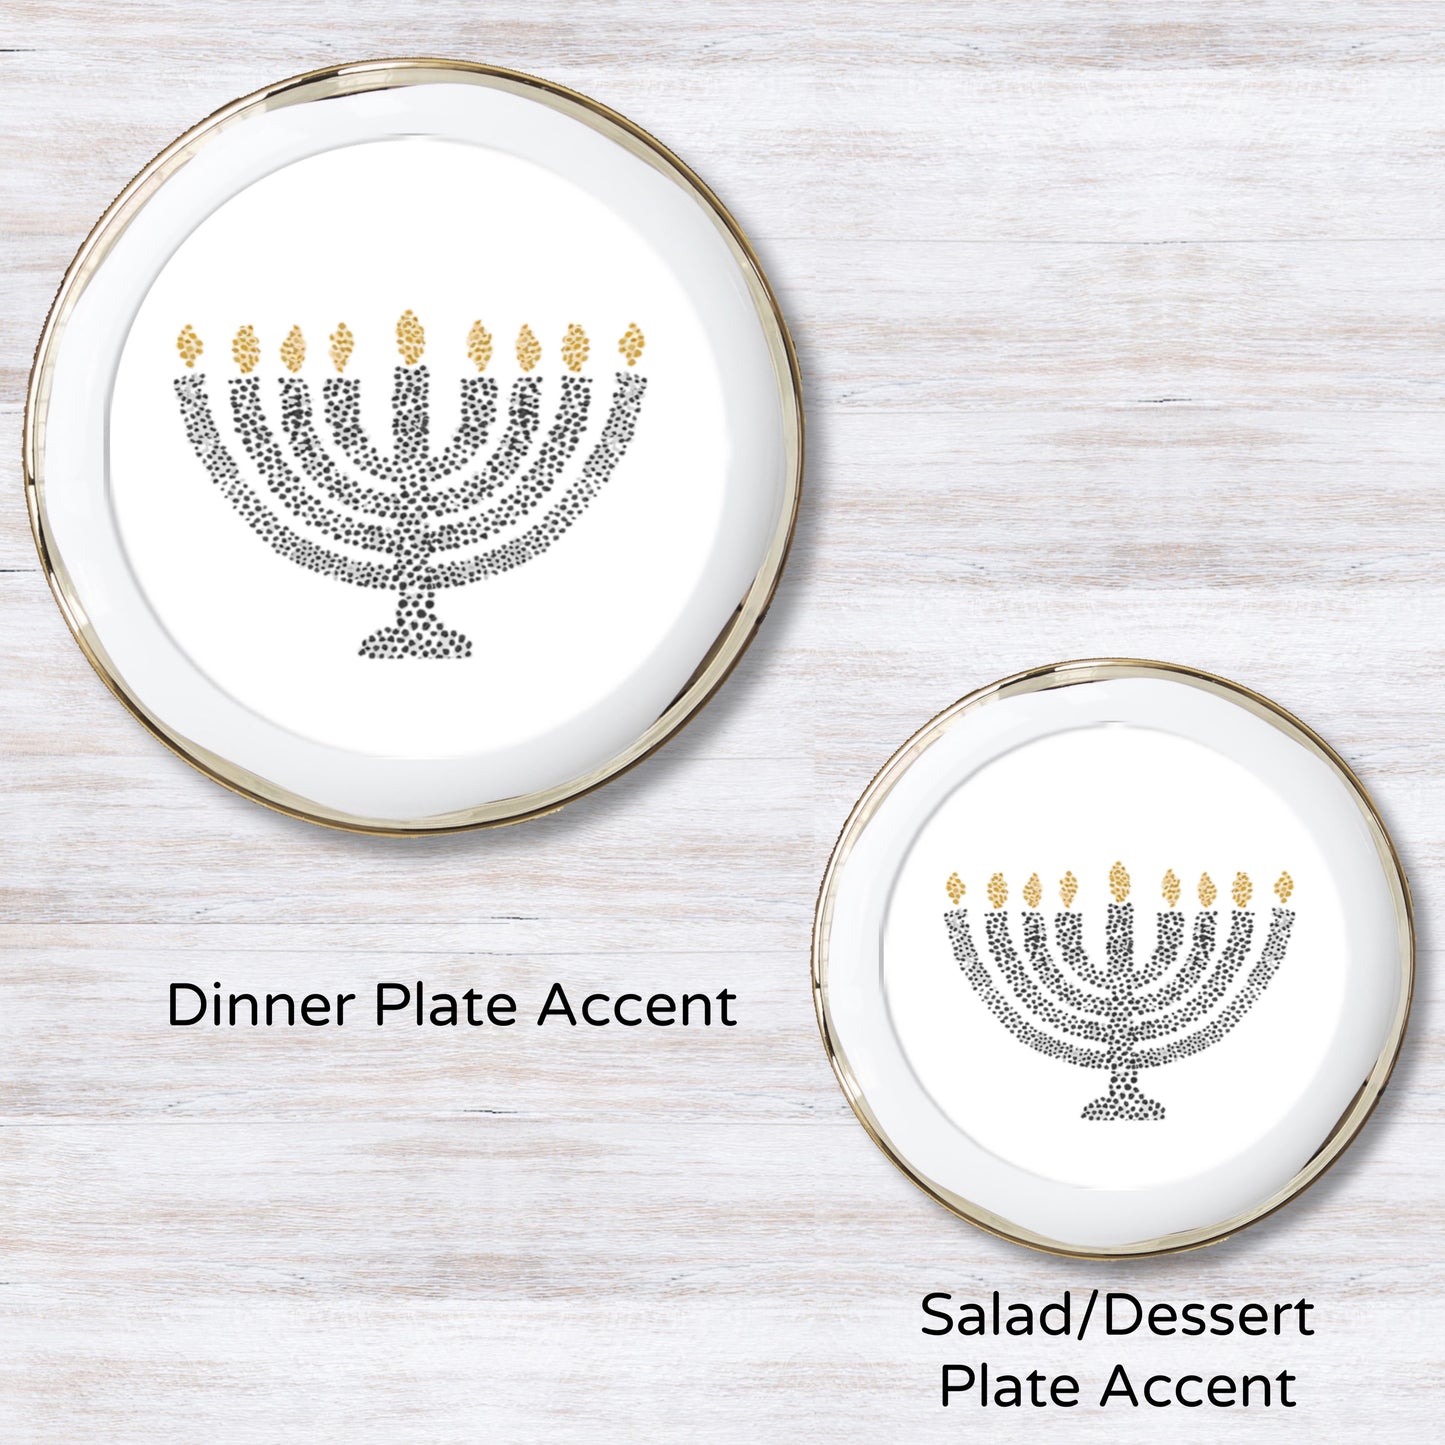 8 Nights of Lights (Black) Plate Accents